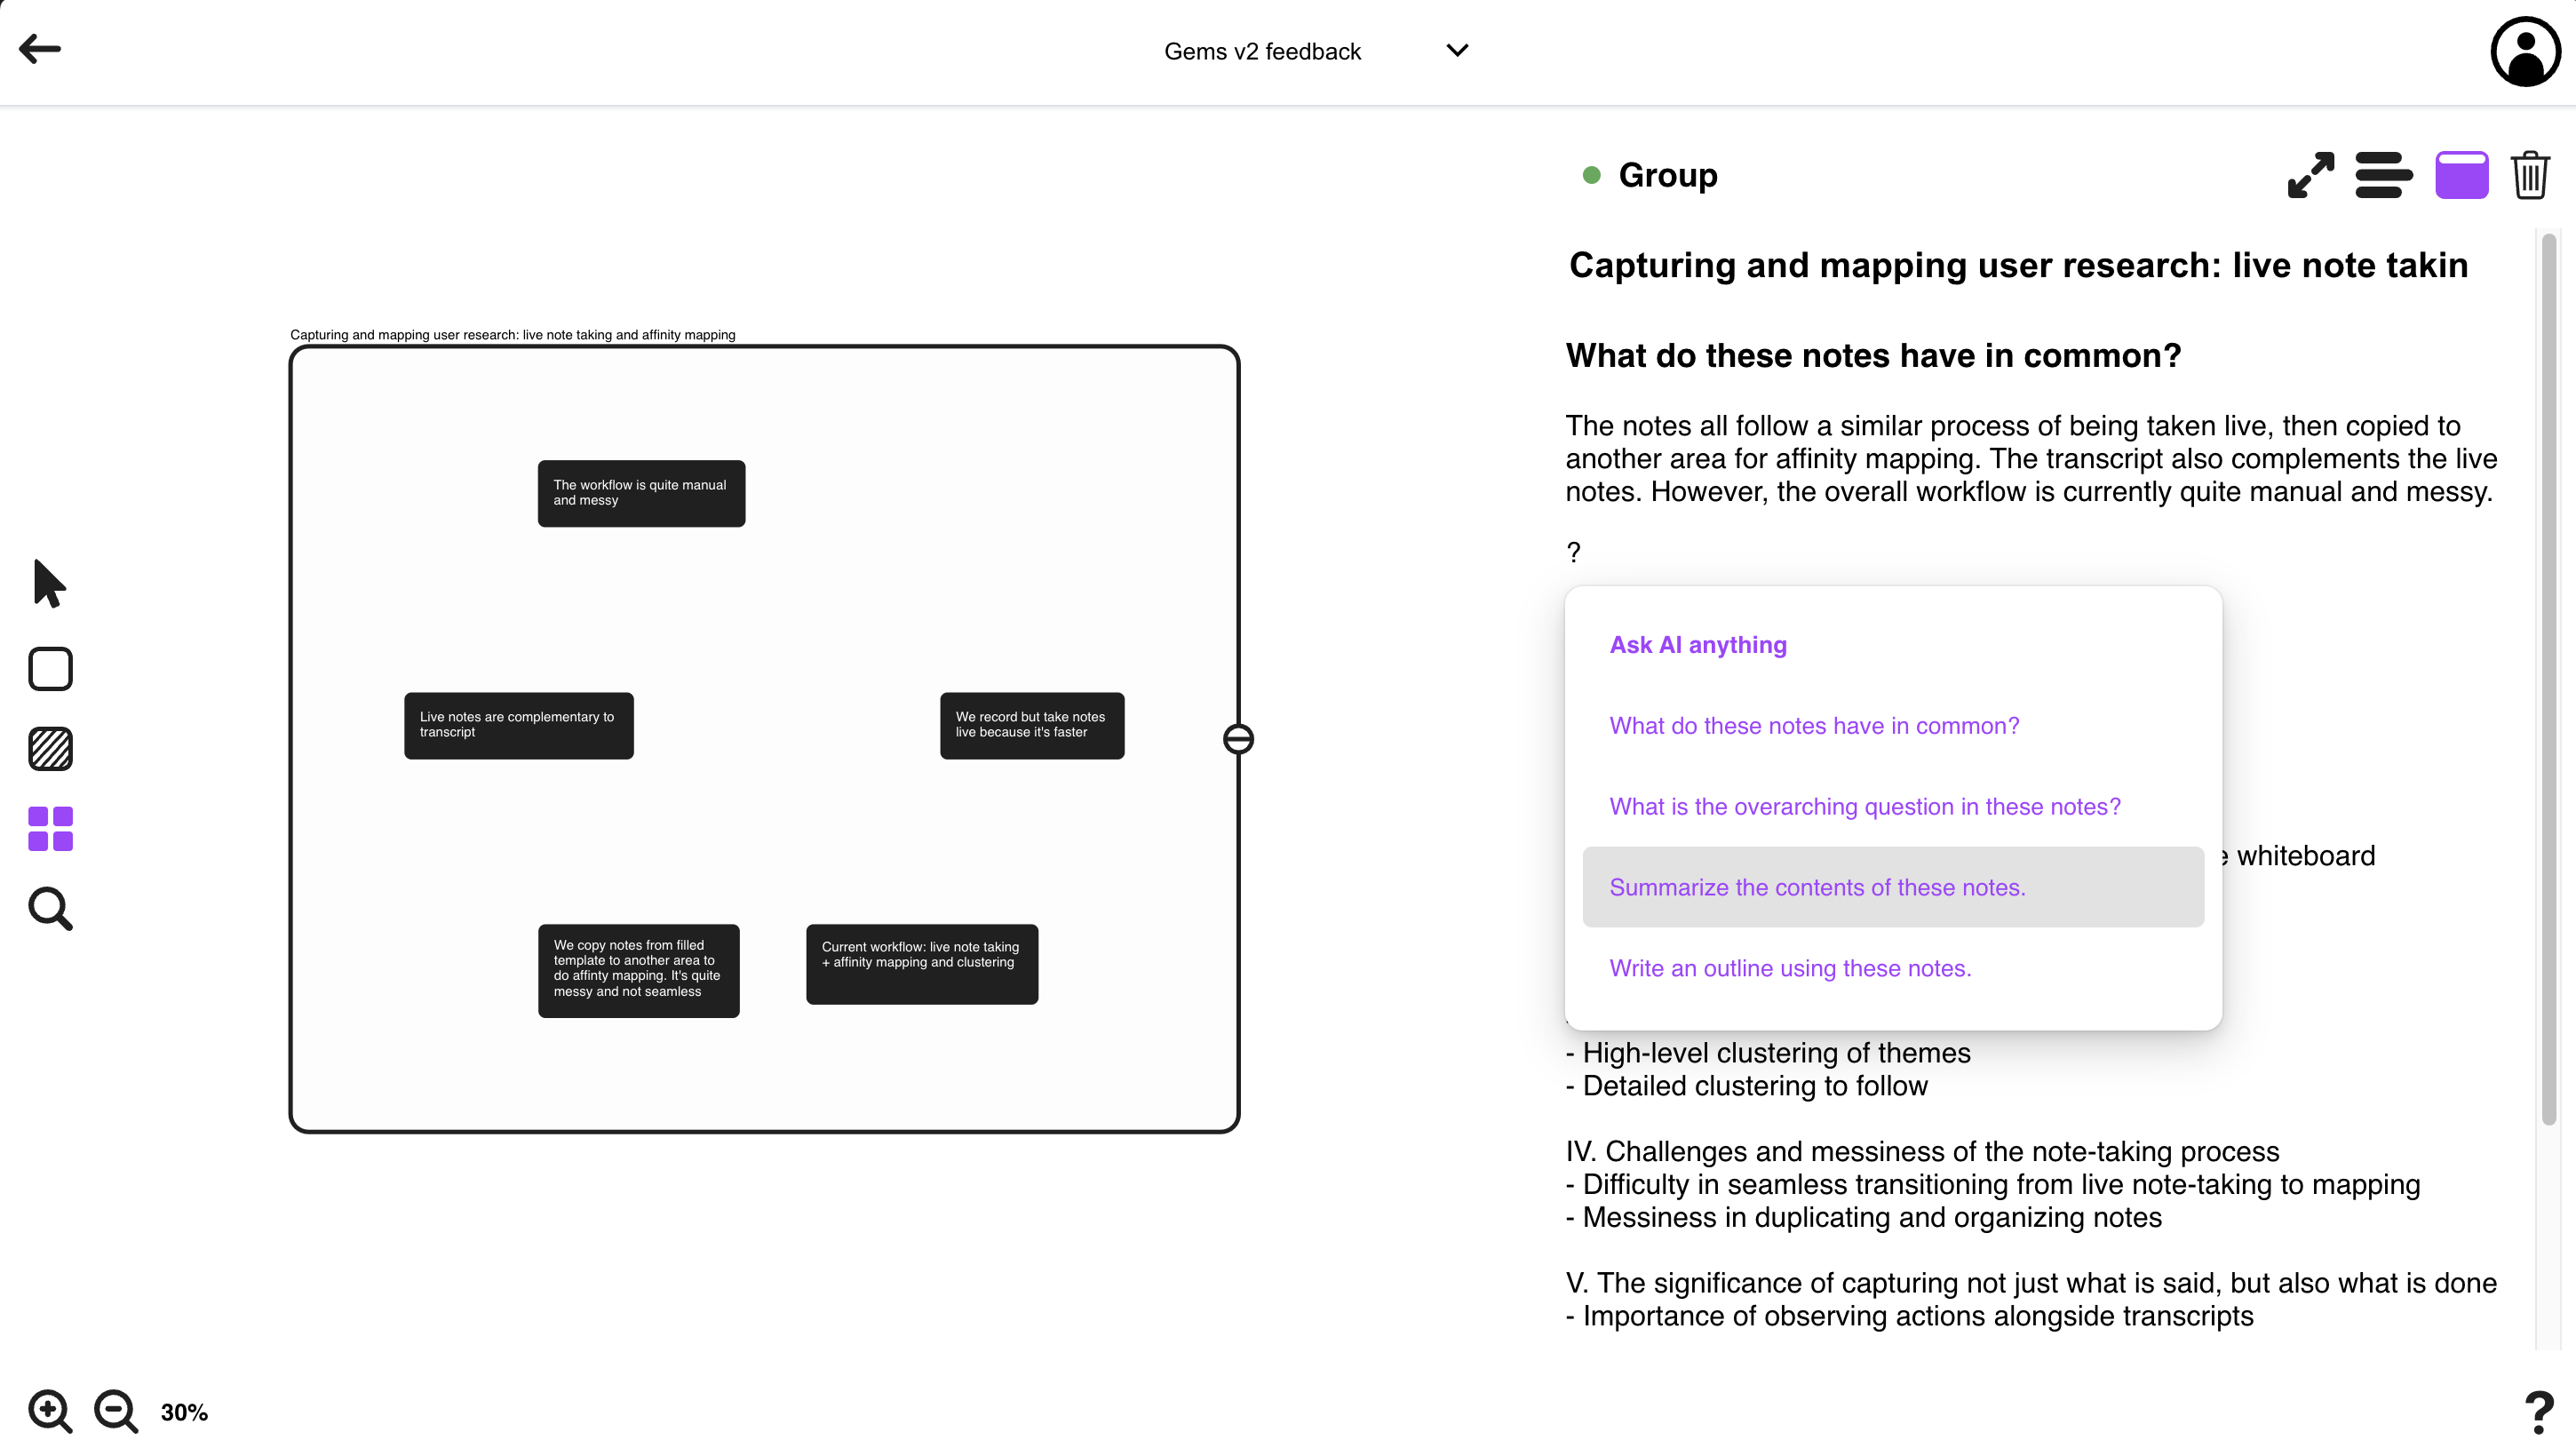 AI groups notes and answers your questions to kick-start the analysis and uncover patterns.